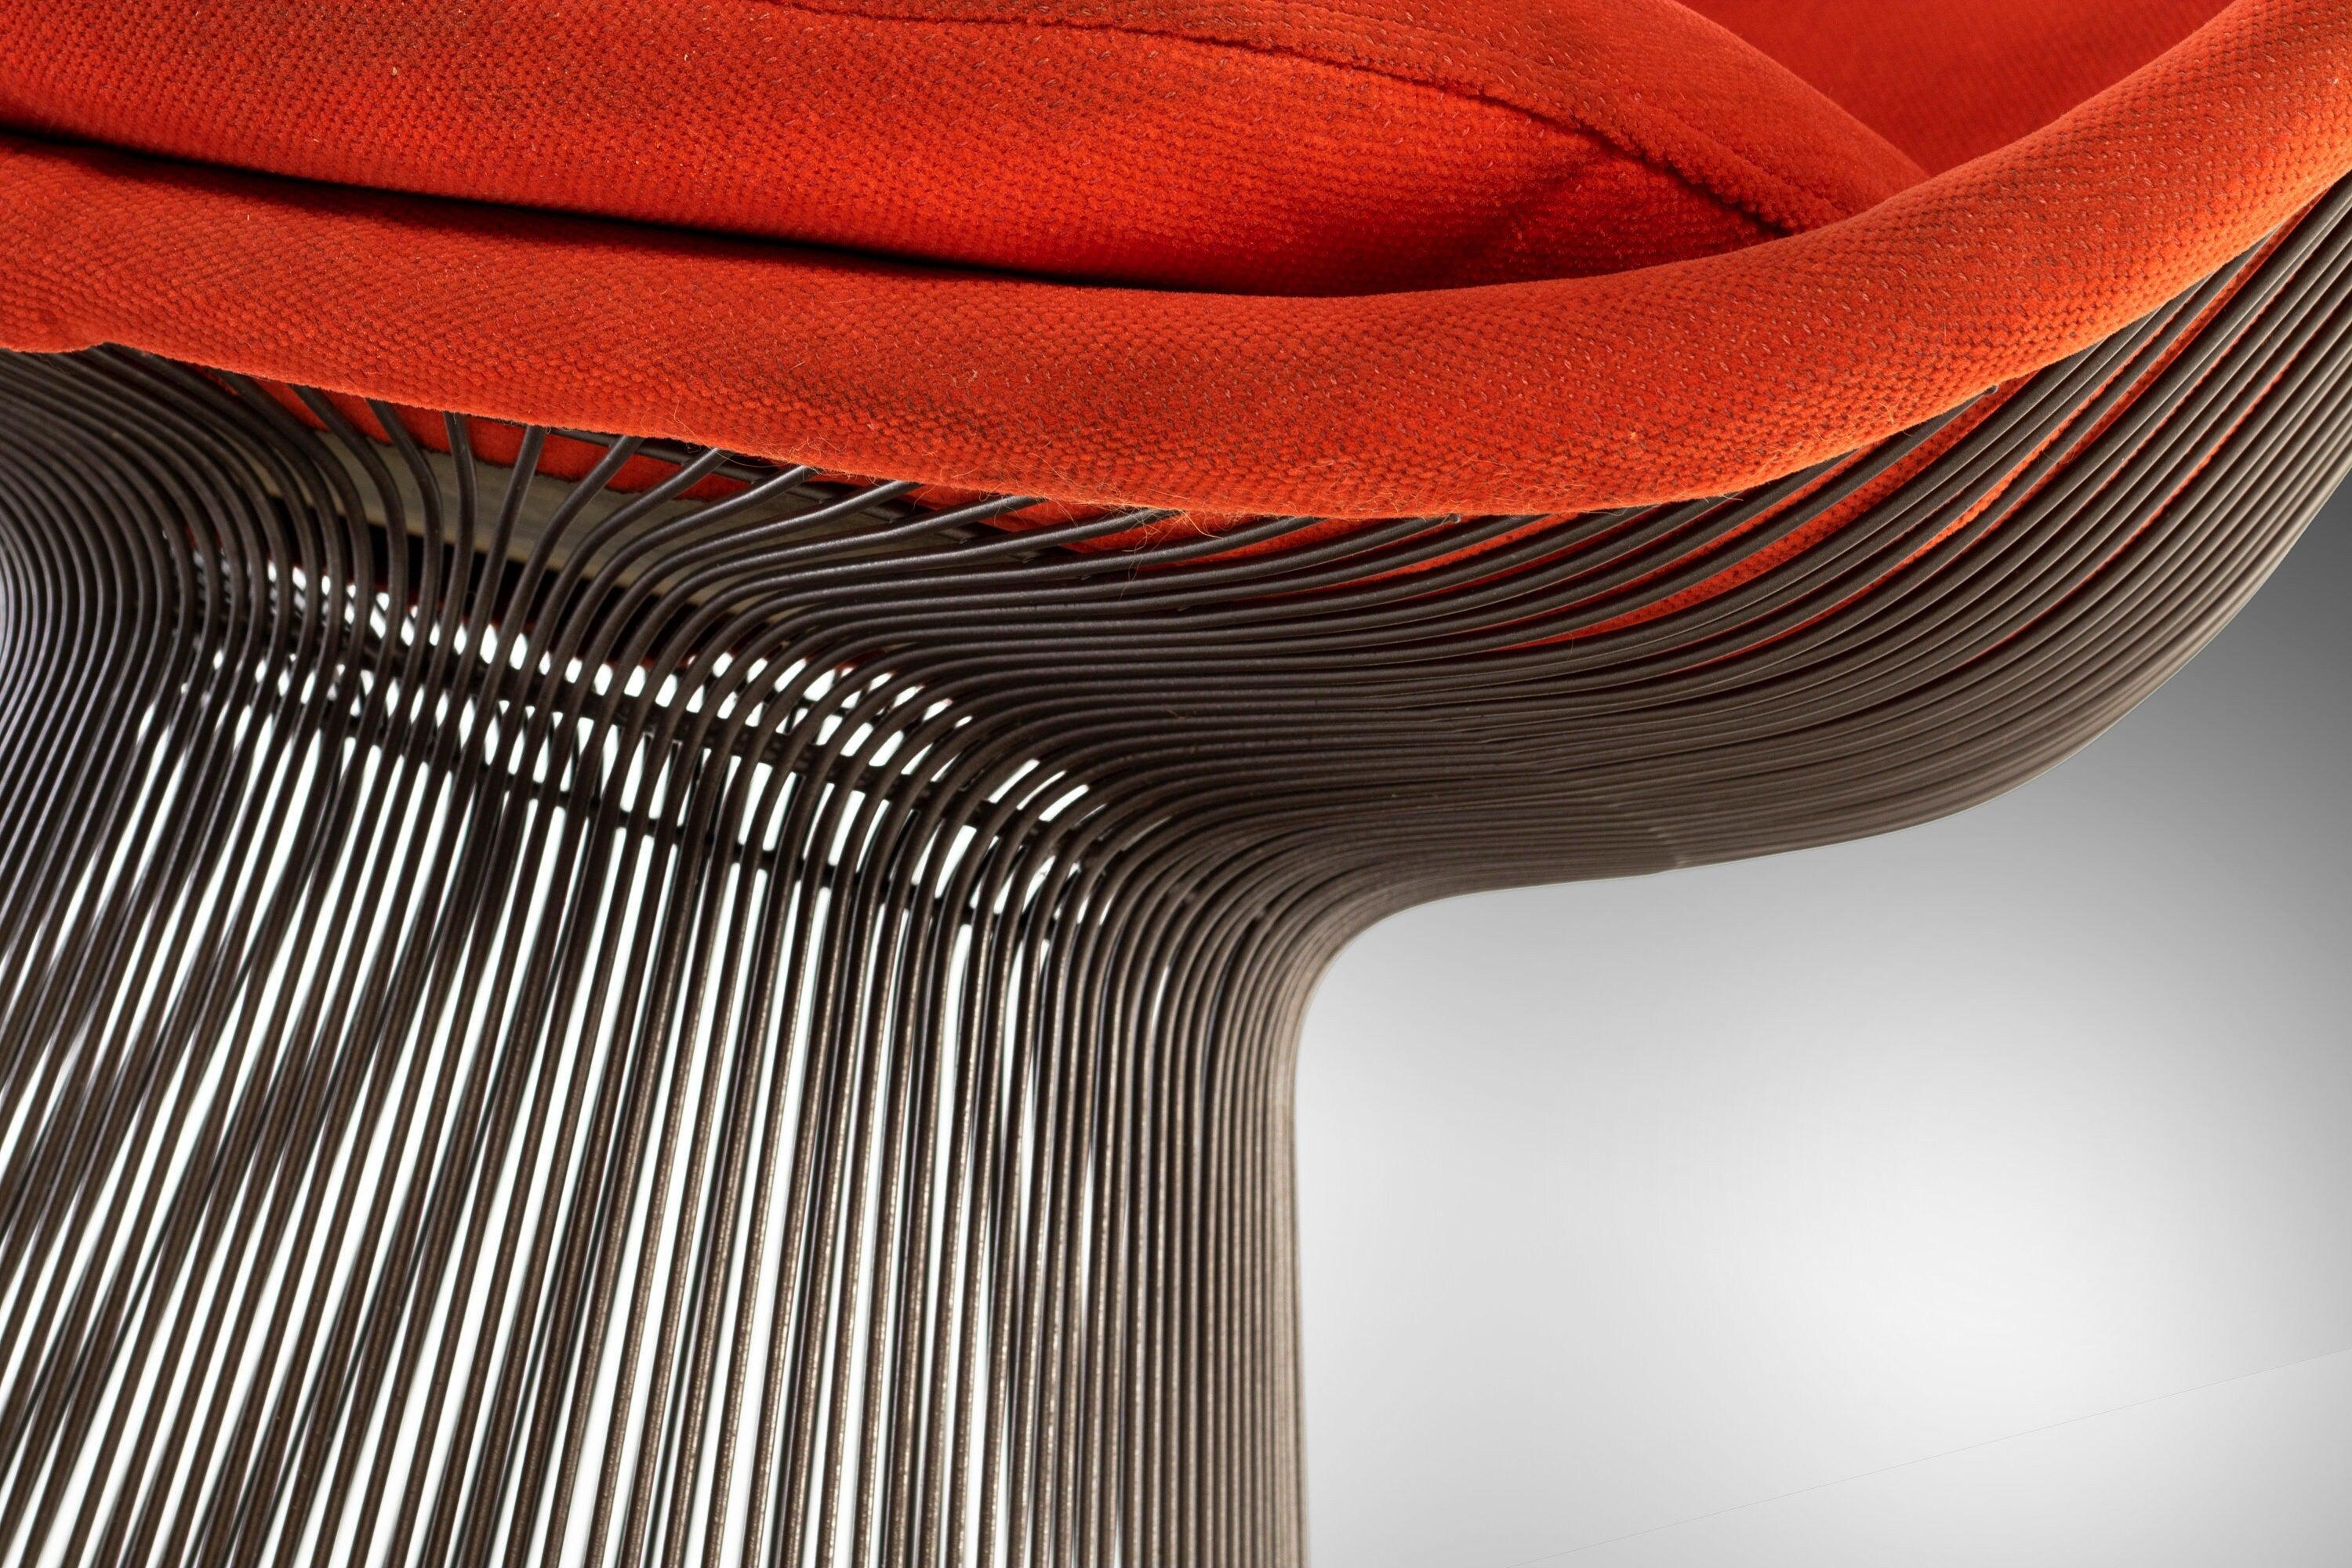 First offered by Knoll in 1966, the Platner Collection wire lounge chair was built for comfort and with the greatest attention to form. Constructed from sculpted wire and often referred to as “decorative, gentle, and graceful”. Constructed